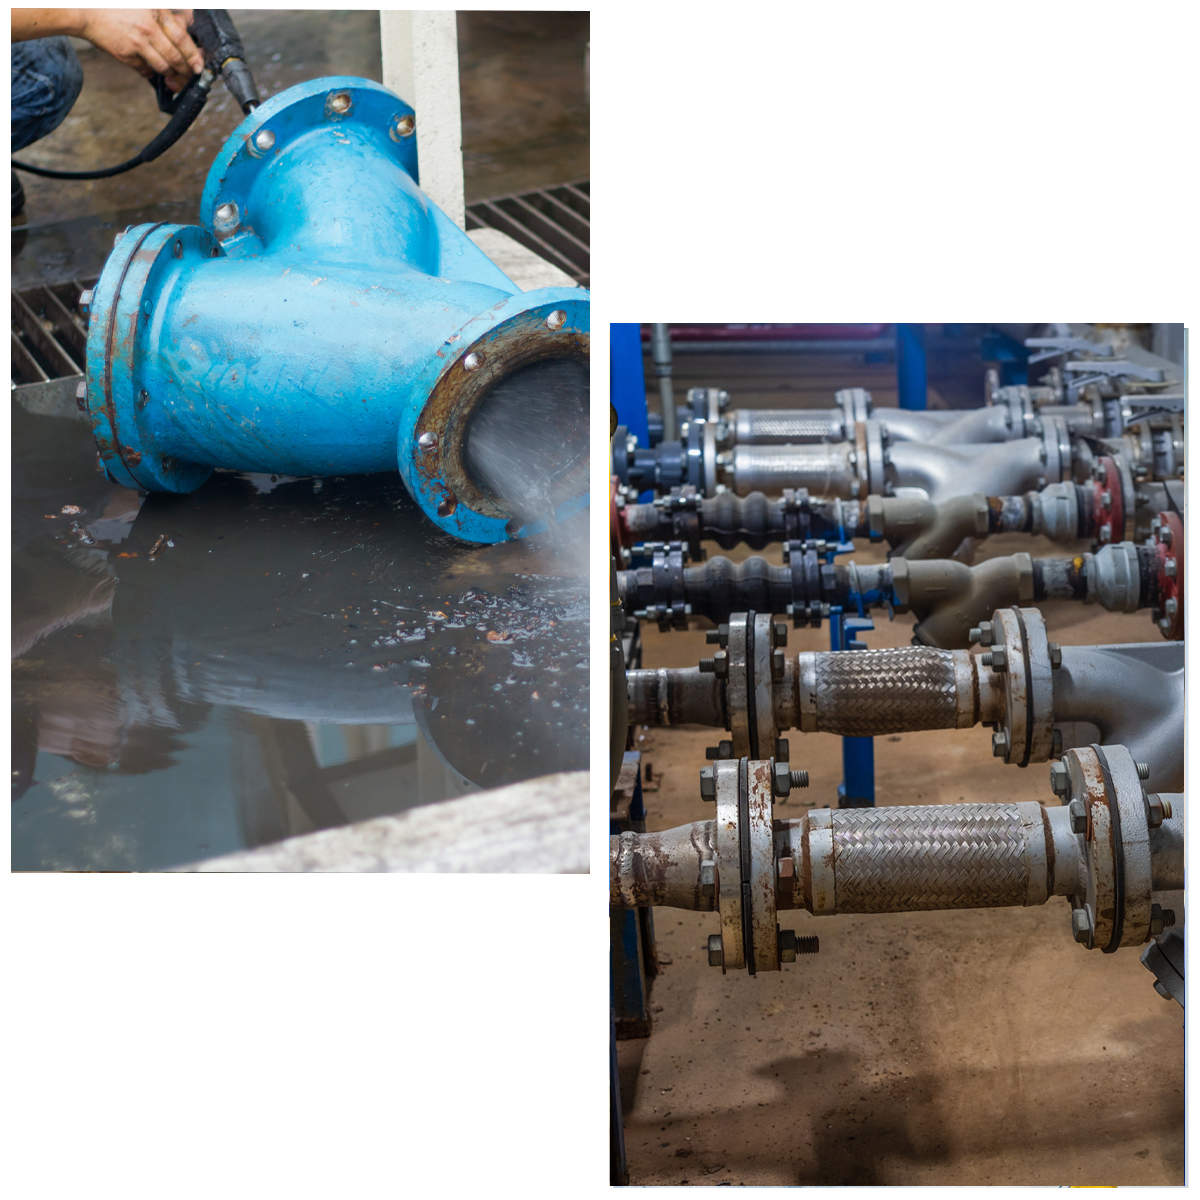 A collage image of industrial Y-Strainers from AlterValve.